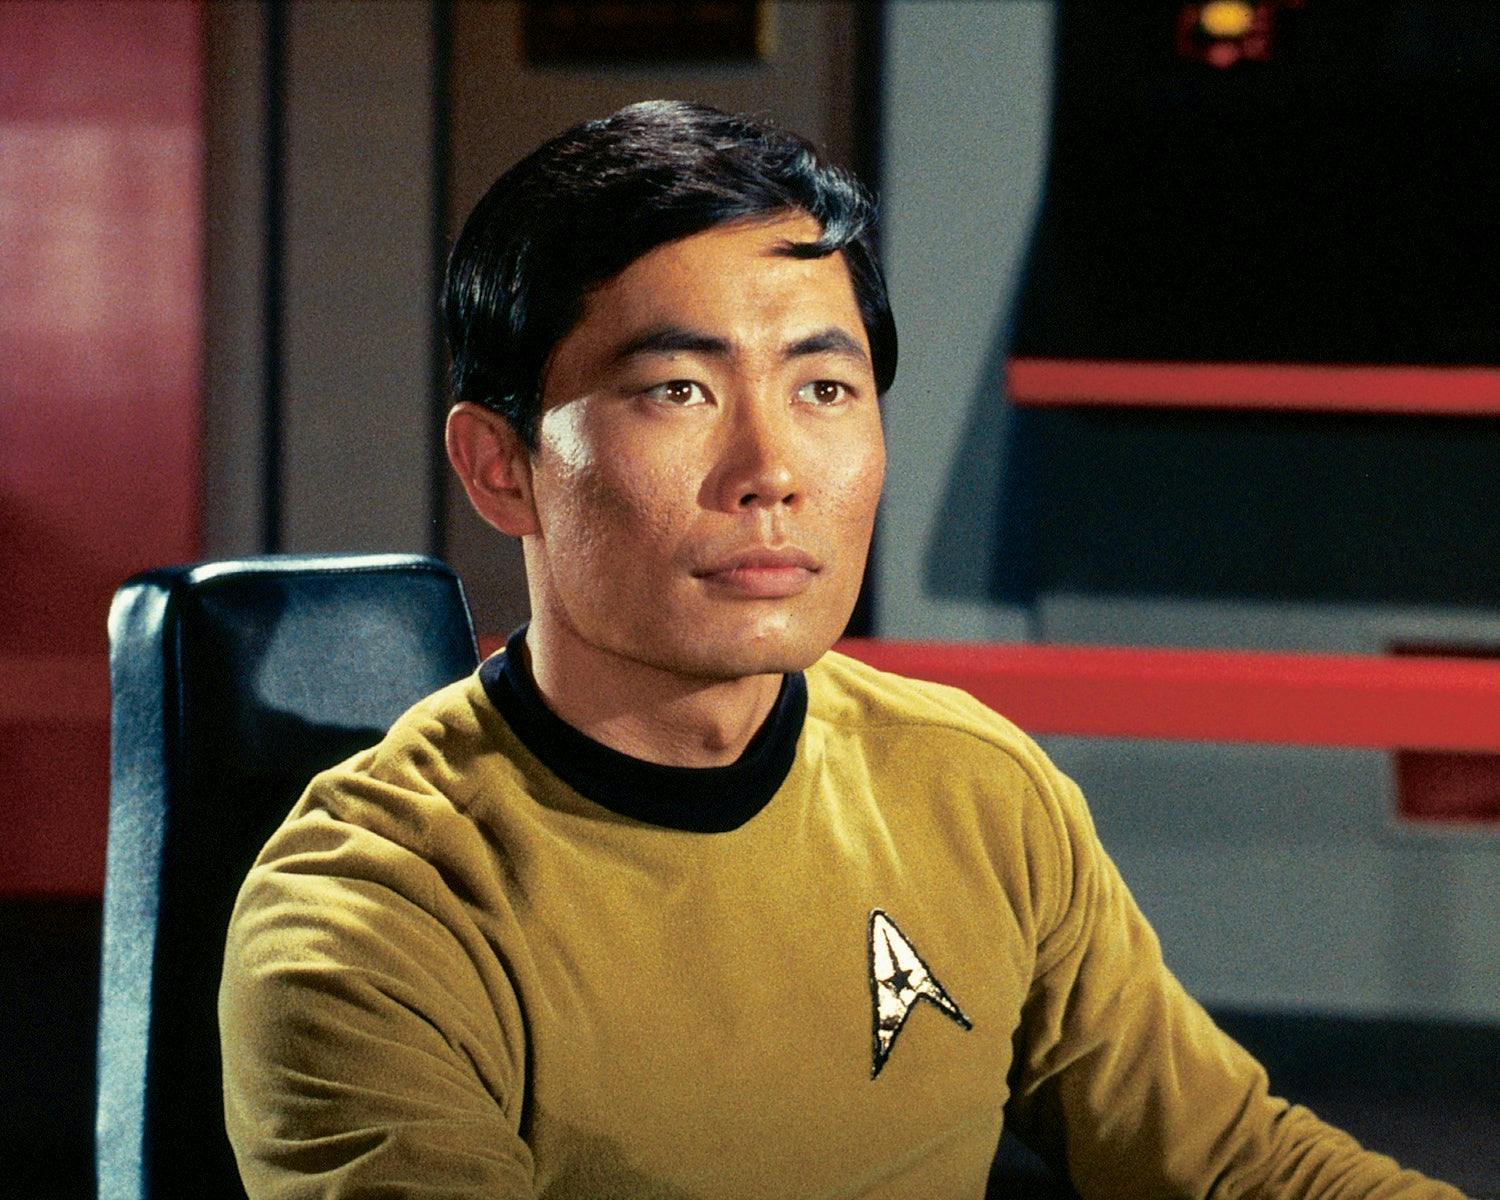 A publicity photo of George Takei as Hikaru Sulu, wearing a gold shirt and sitting at the helm of the Enterprise.